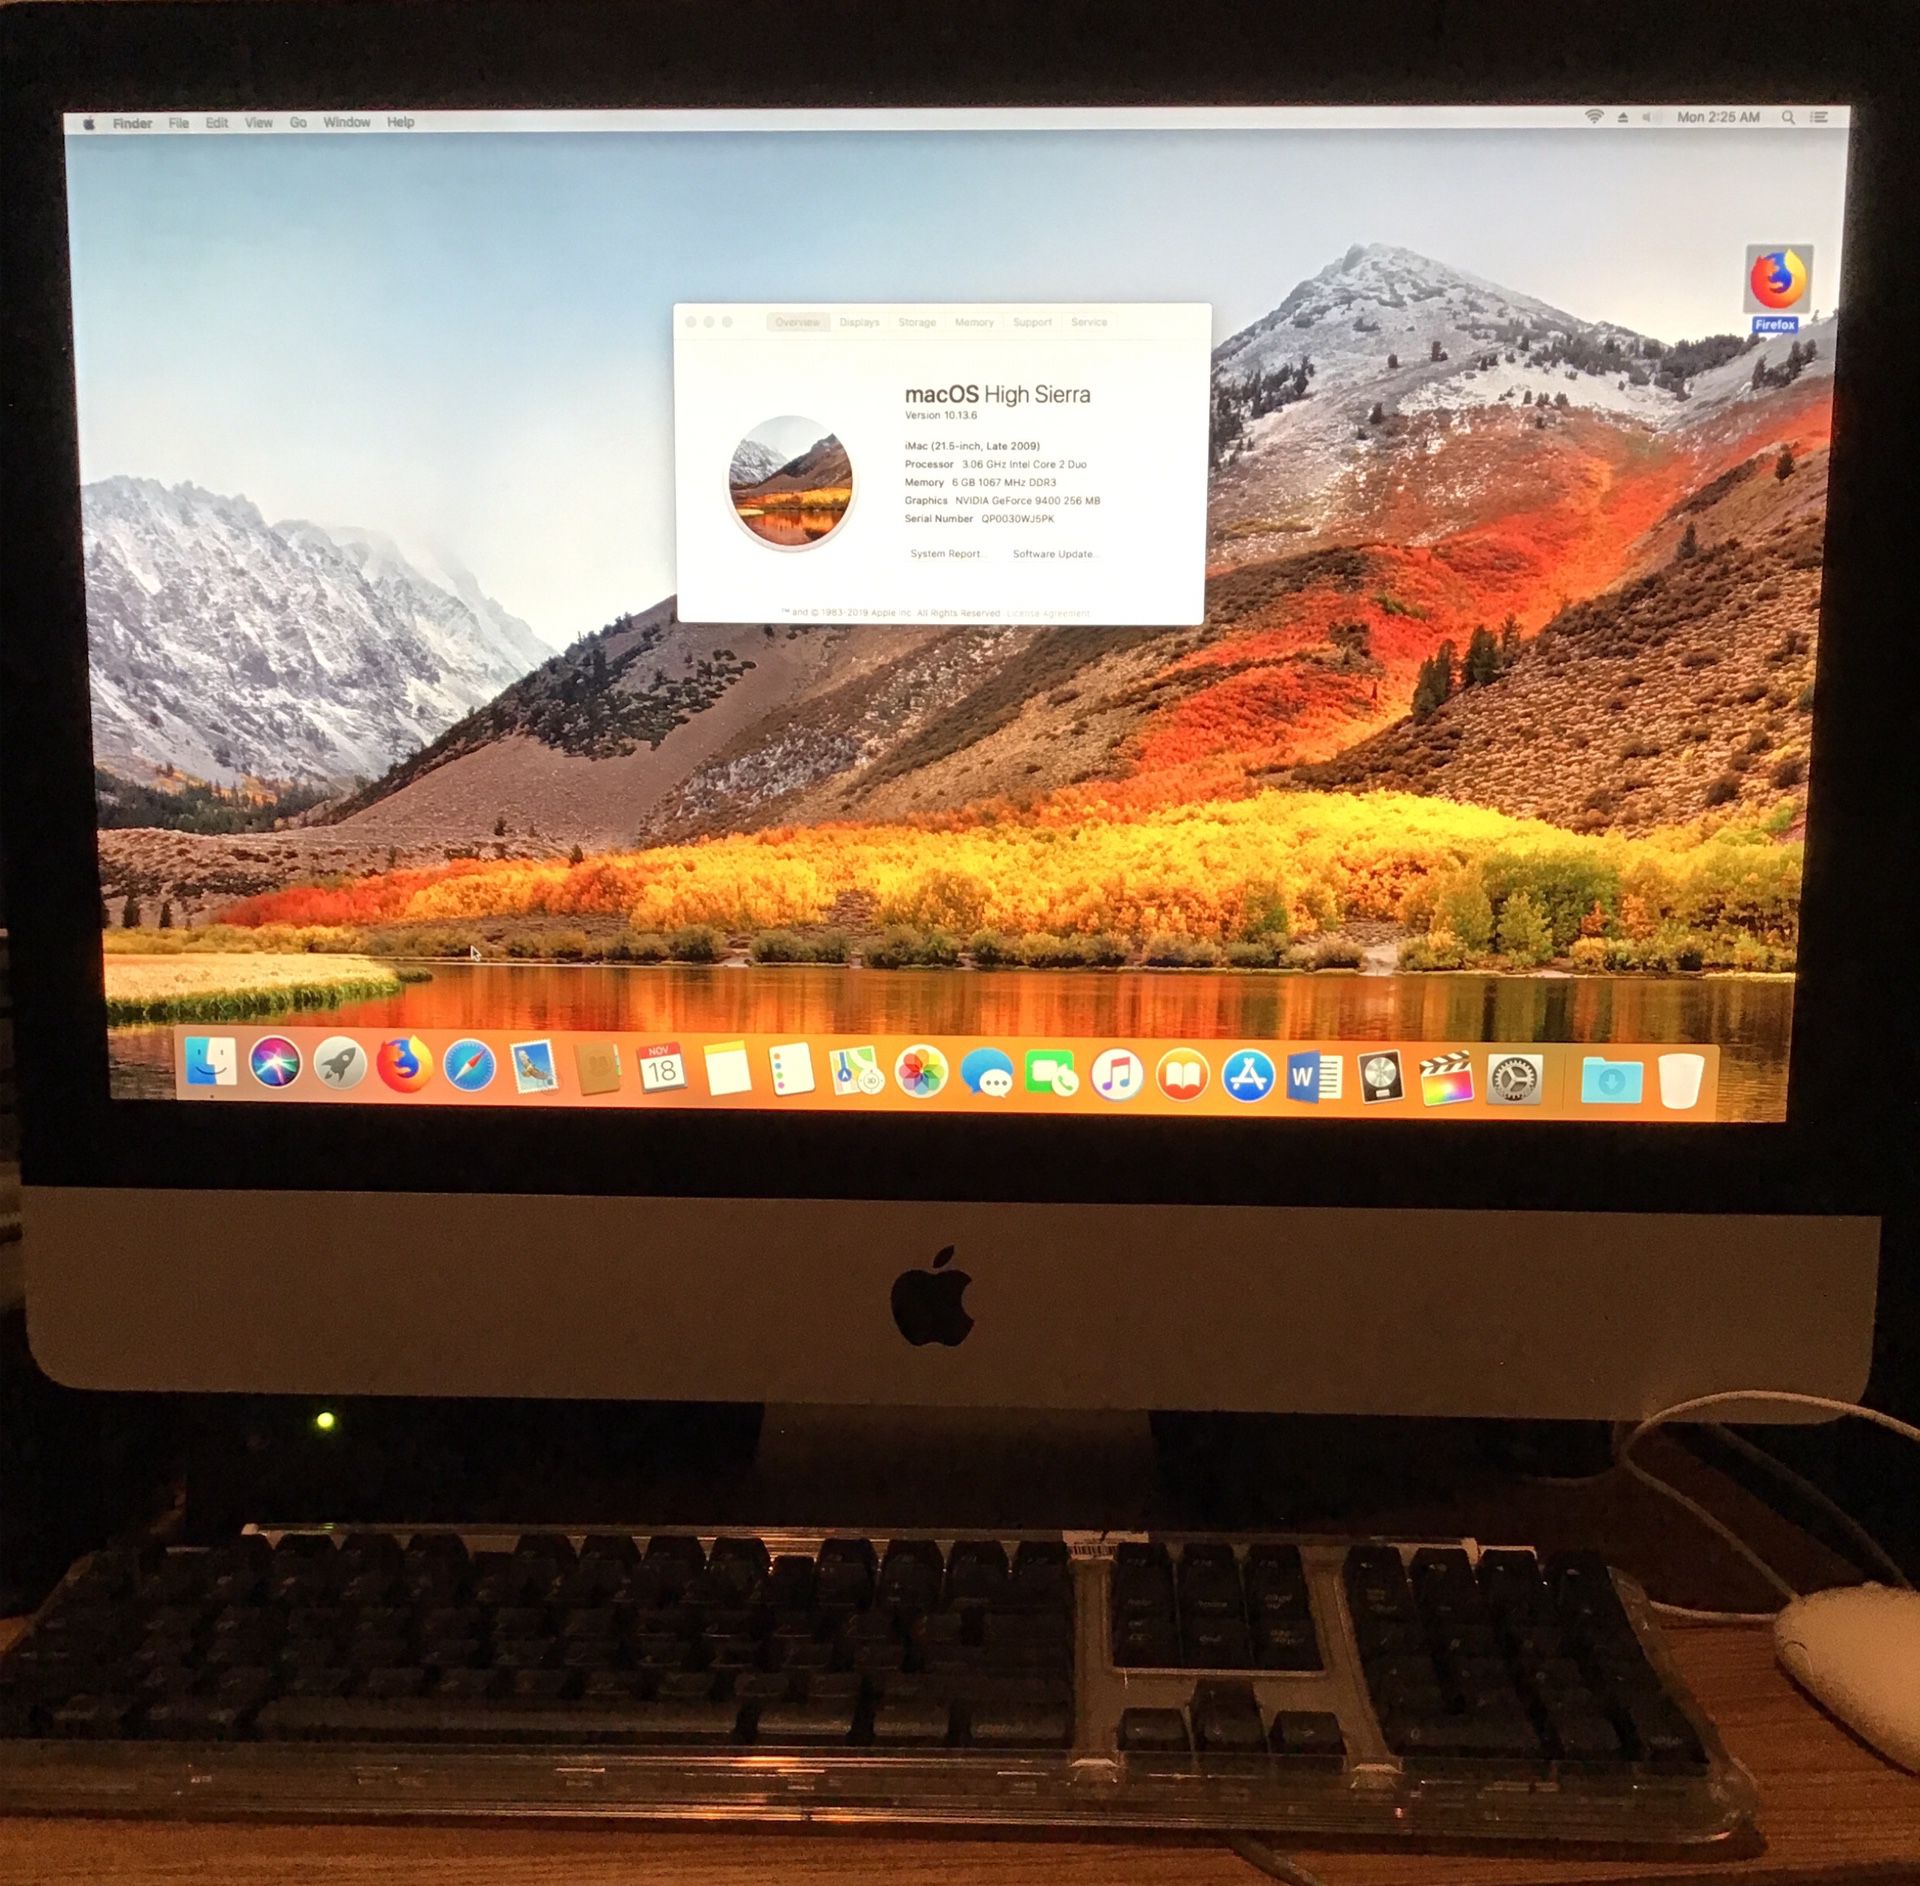 Apple 21.5in Screen iMac Computer w/Office 2016, It has Video and Music production software, Burner Web Cam Bluetooth WiFi and etc. 3.06.Ghz. Intel d